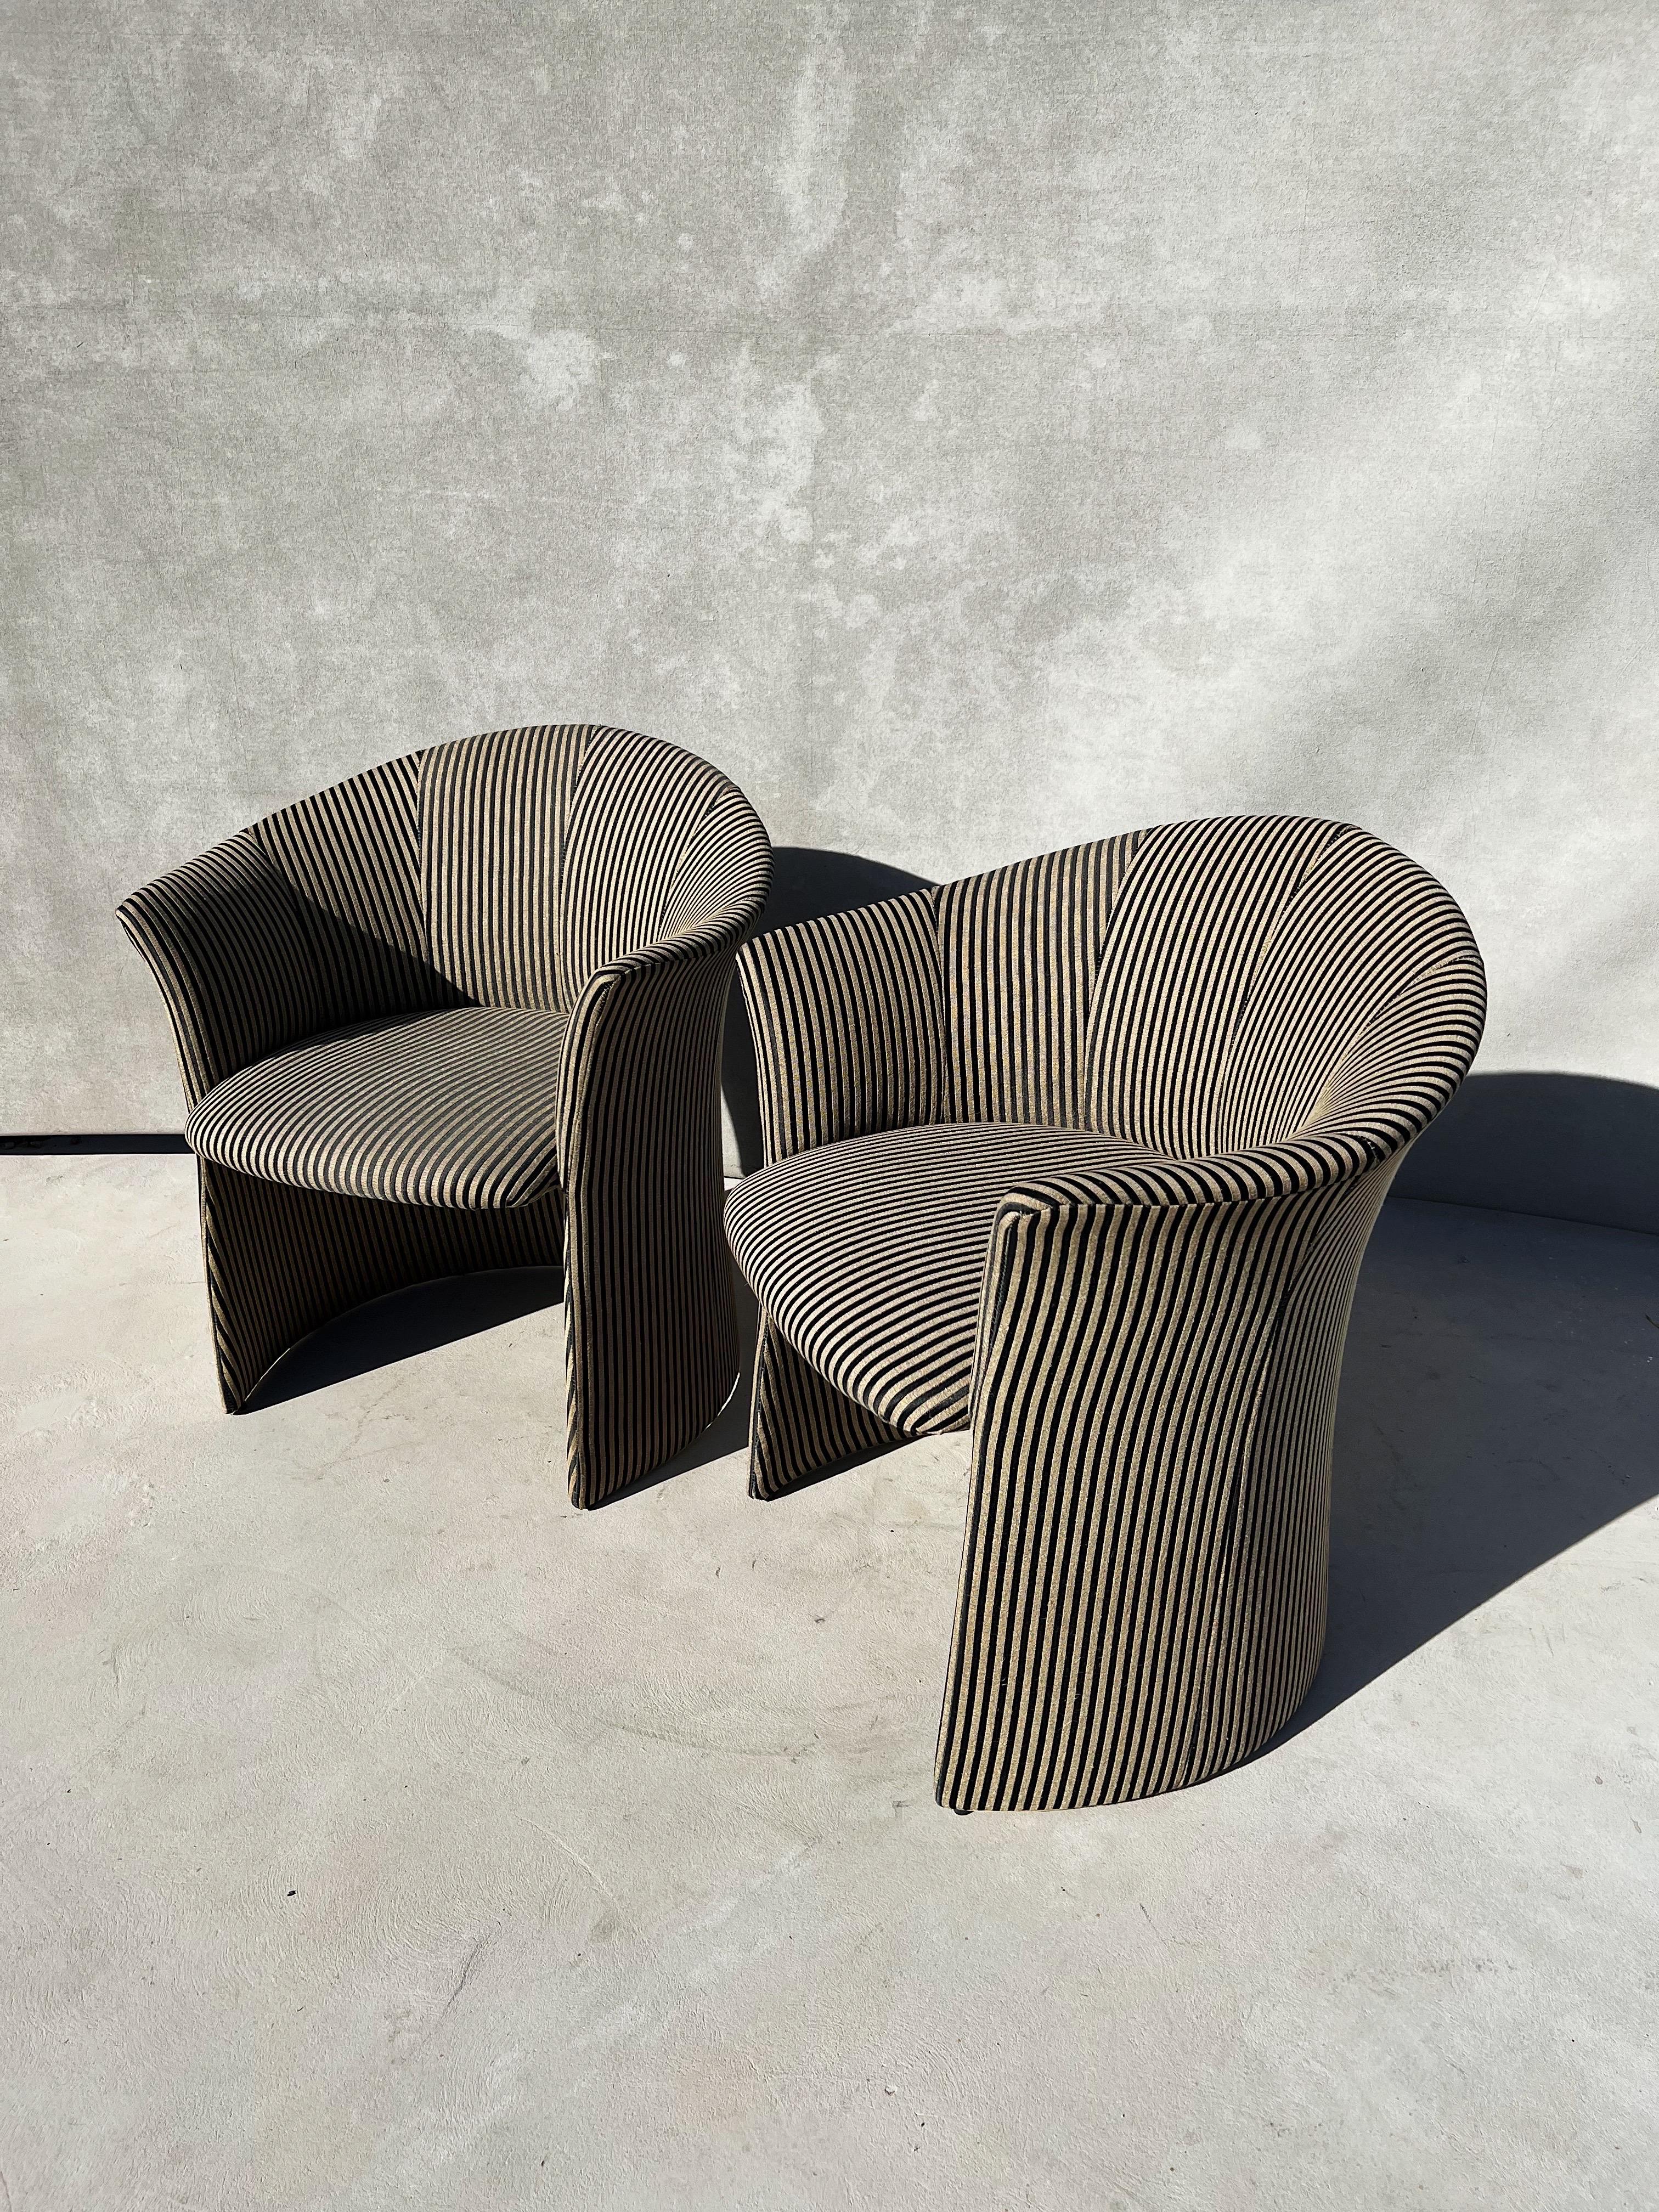 A vintage modern pair of sculptural club chairs, upholstered in a traditional striped fabric.

Each chair is sophisticated, elegant, fashionable and quite the statement to add to any room.

The upholstery was custom designed, inspired by the